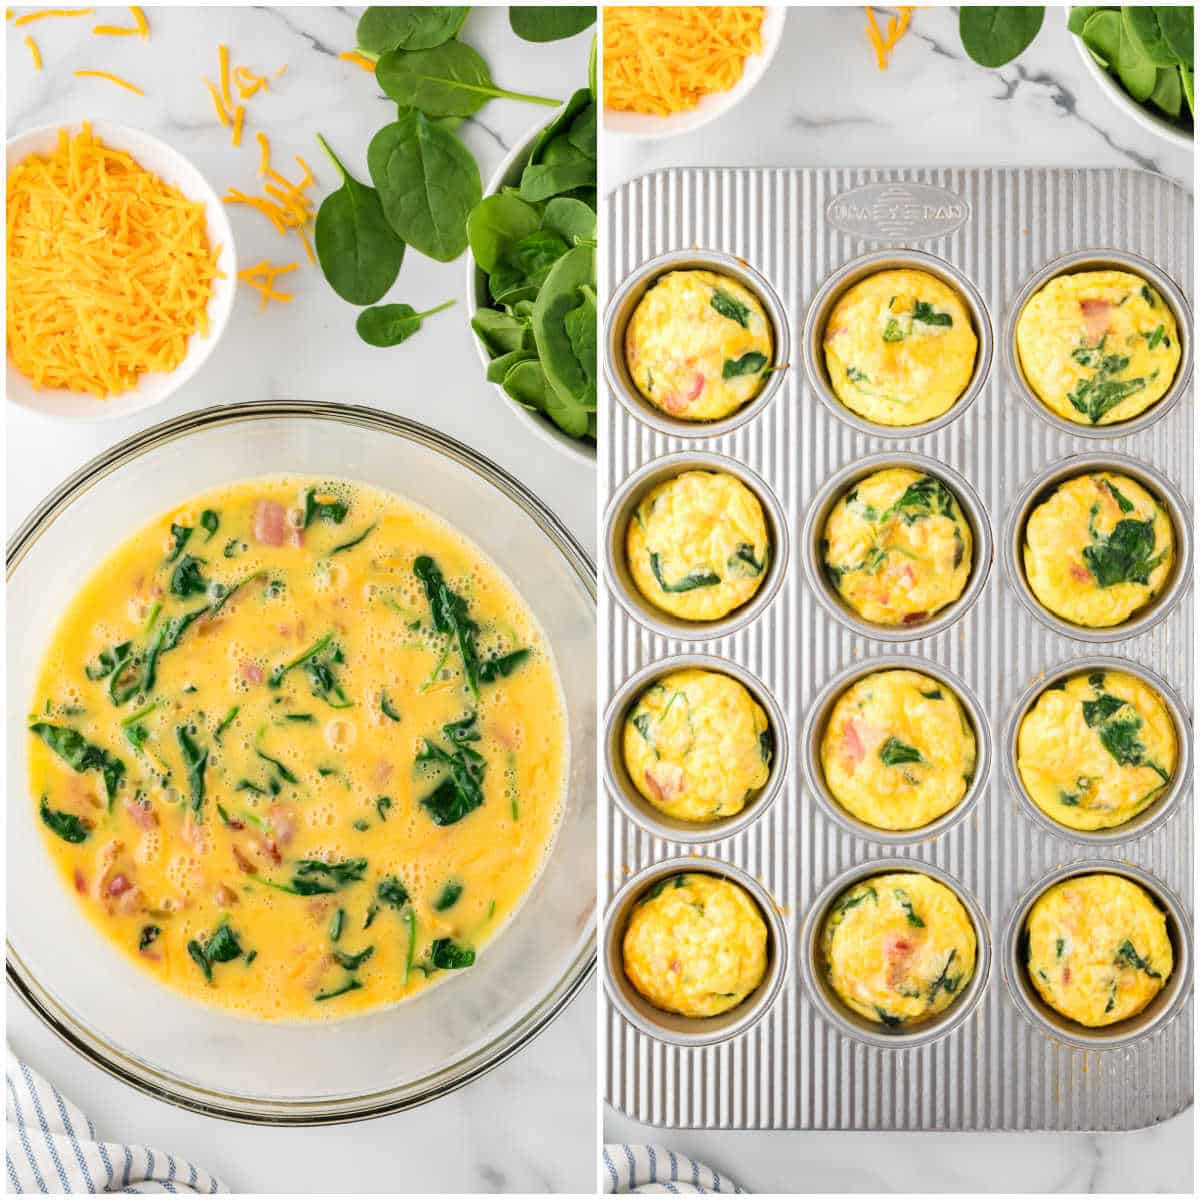 Steps to make spinach and cheese egg muffins.